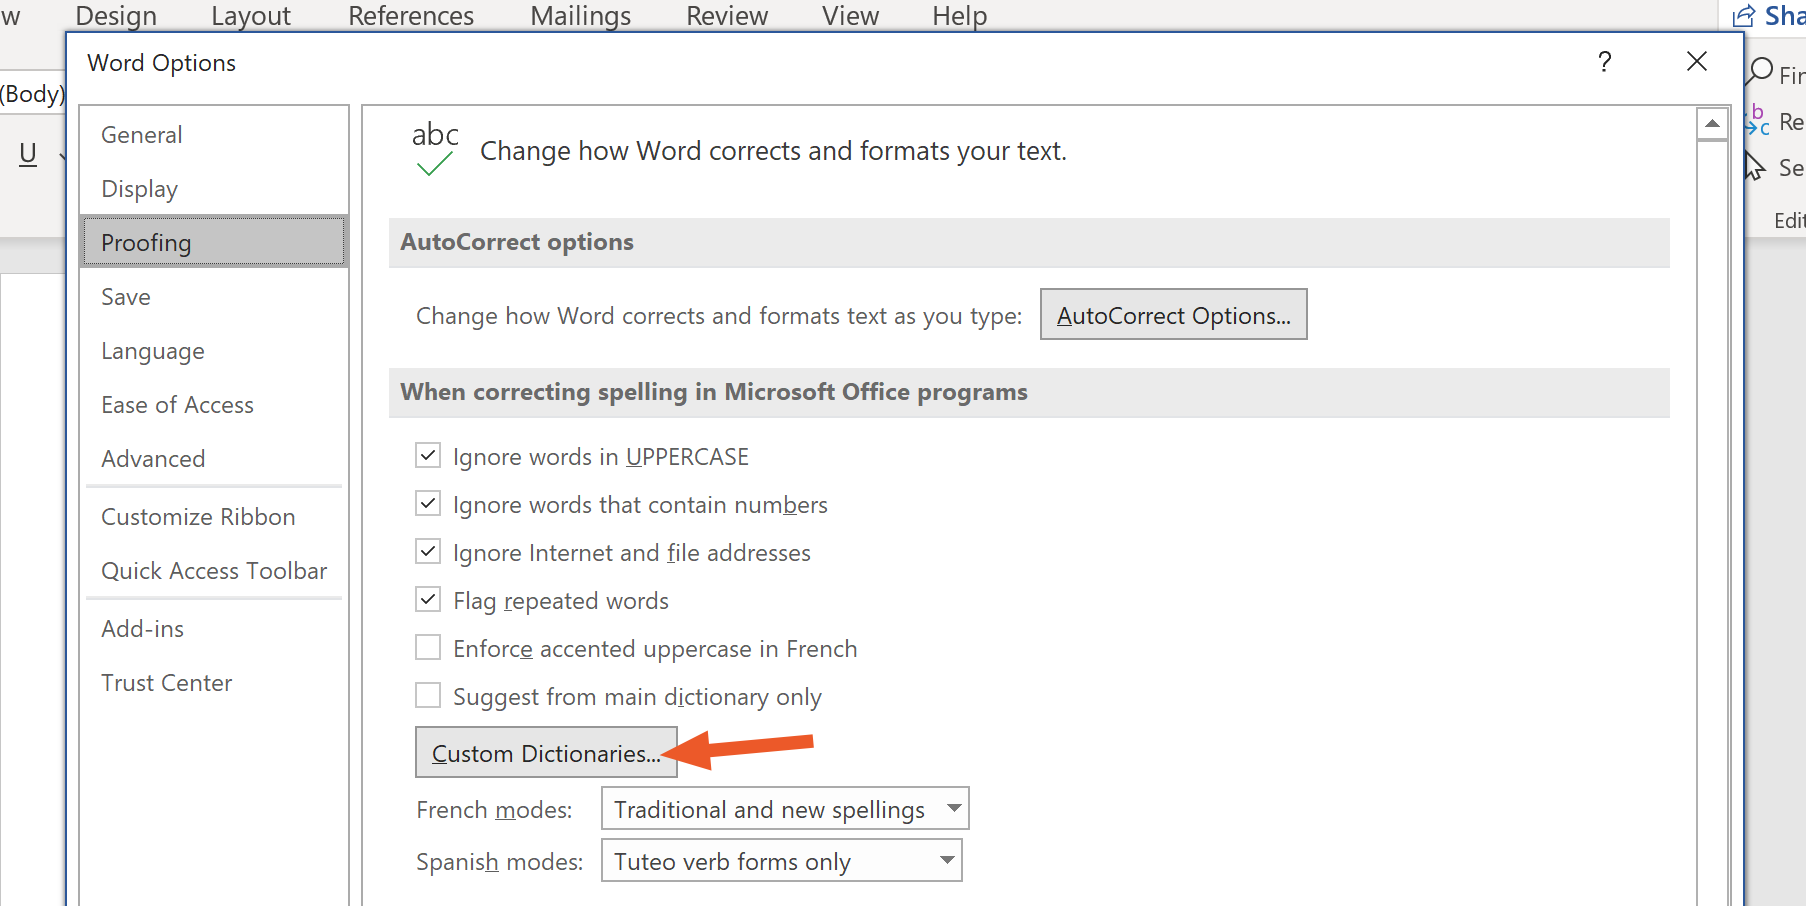 how to delete custom dictionary in word